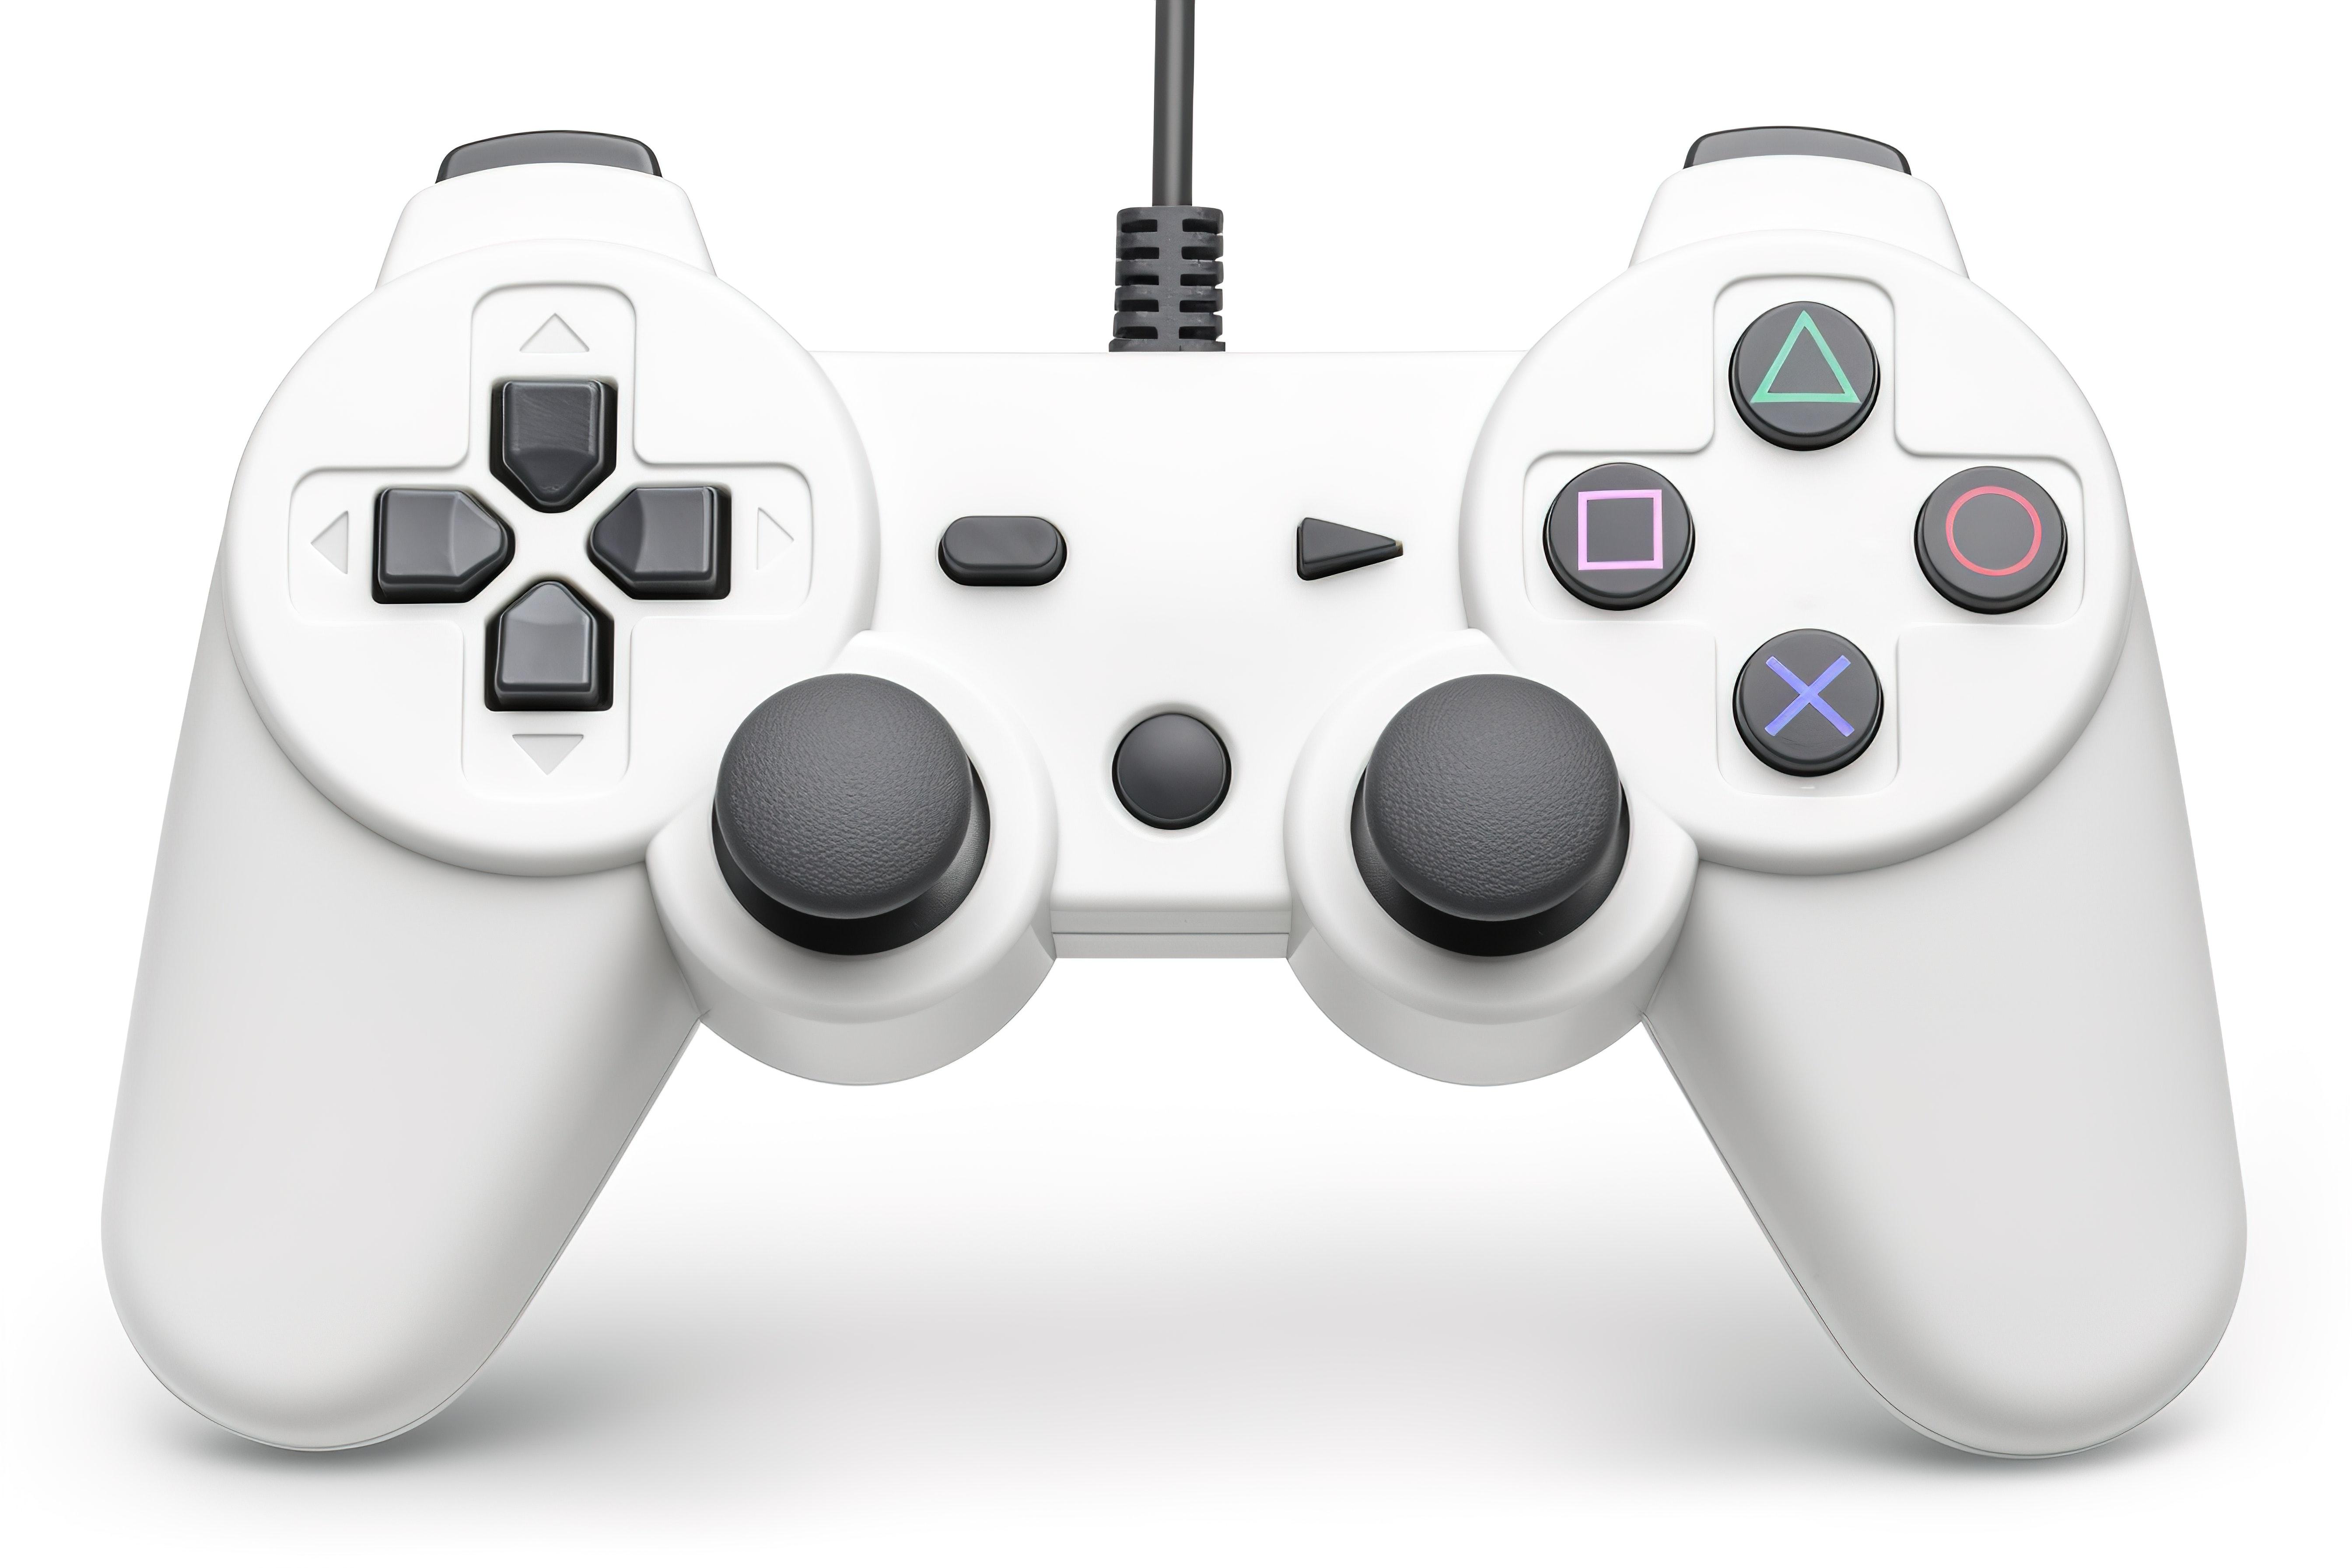 Does Sony make PS3 controllers?